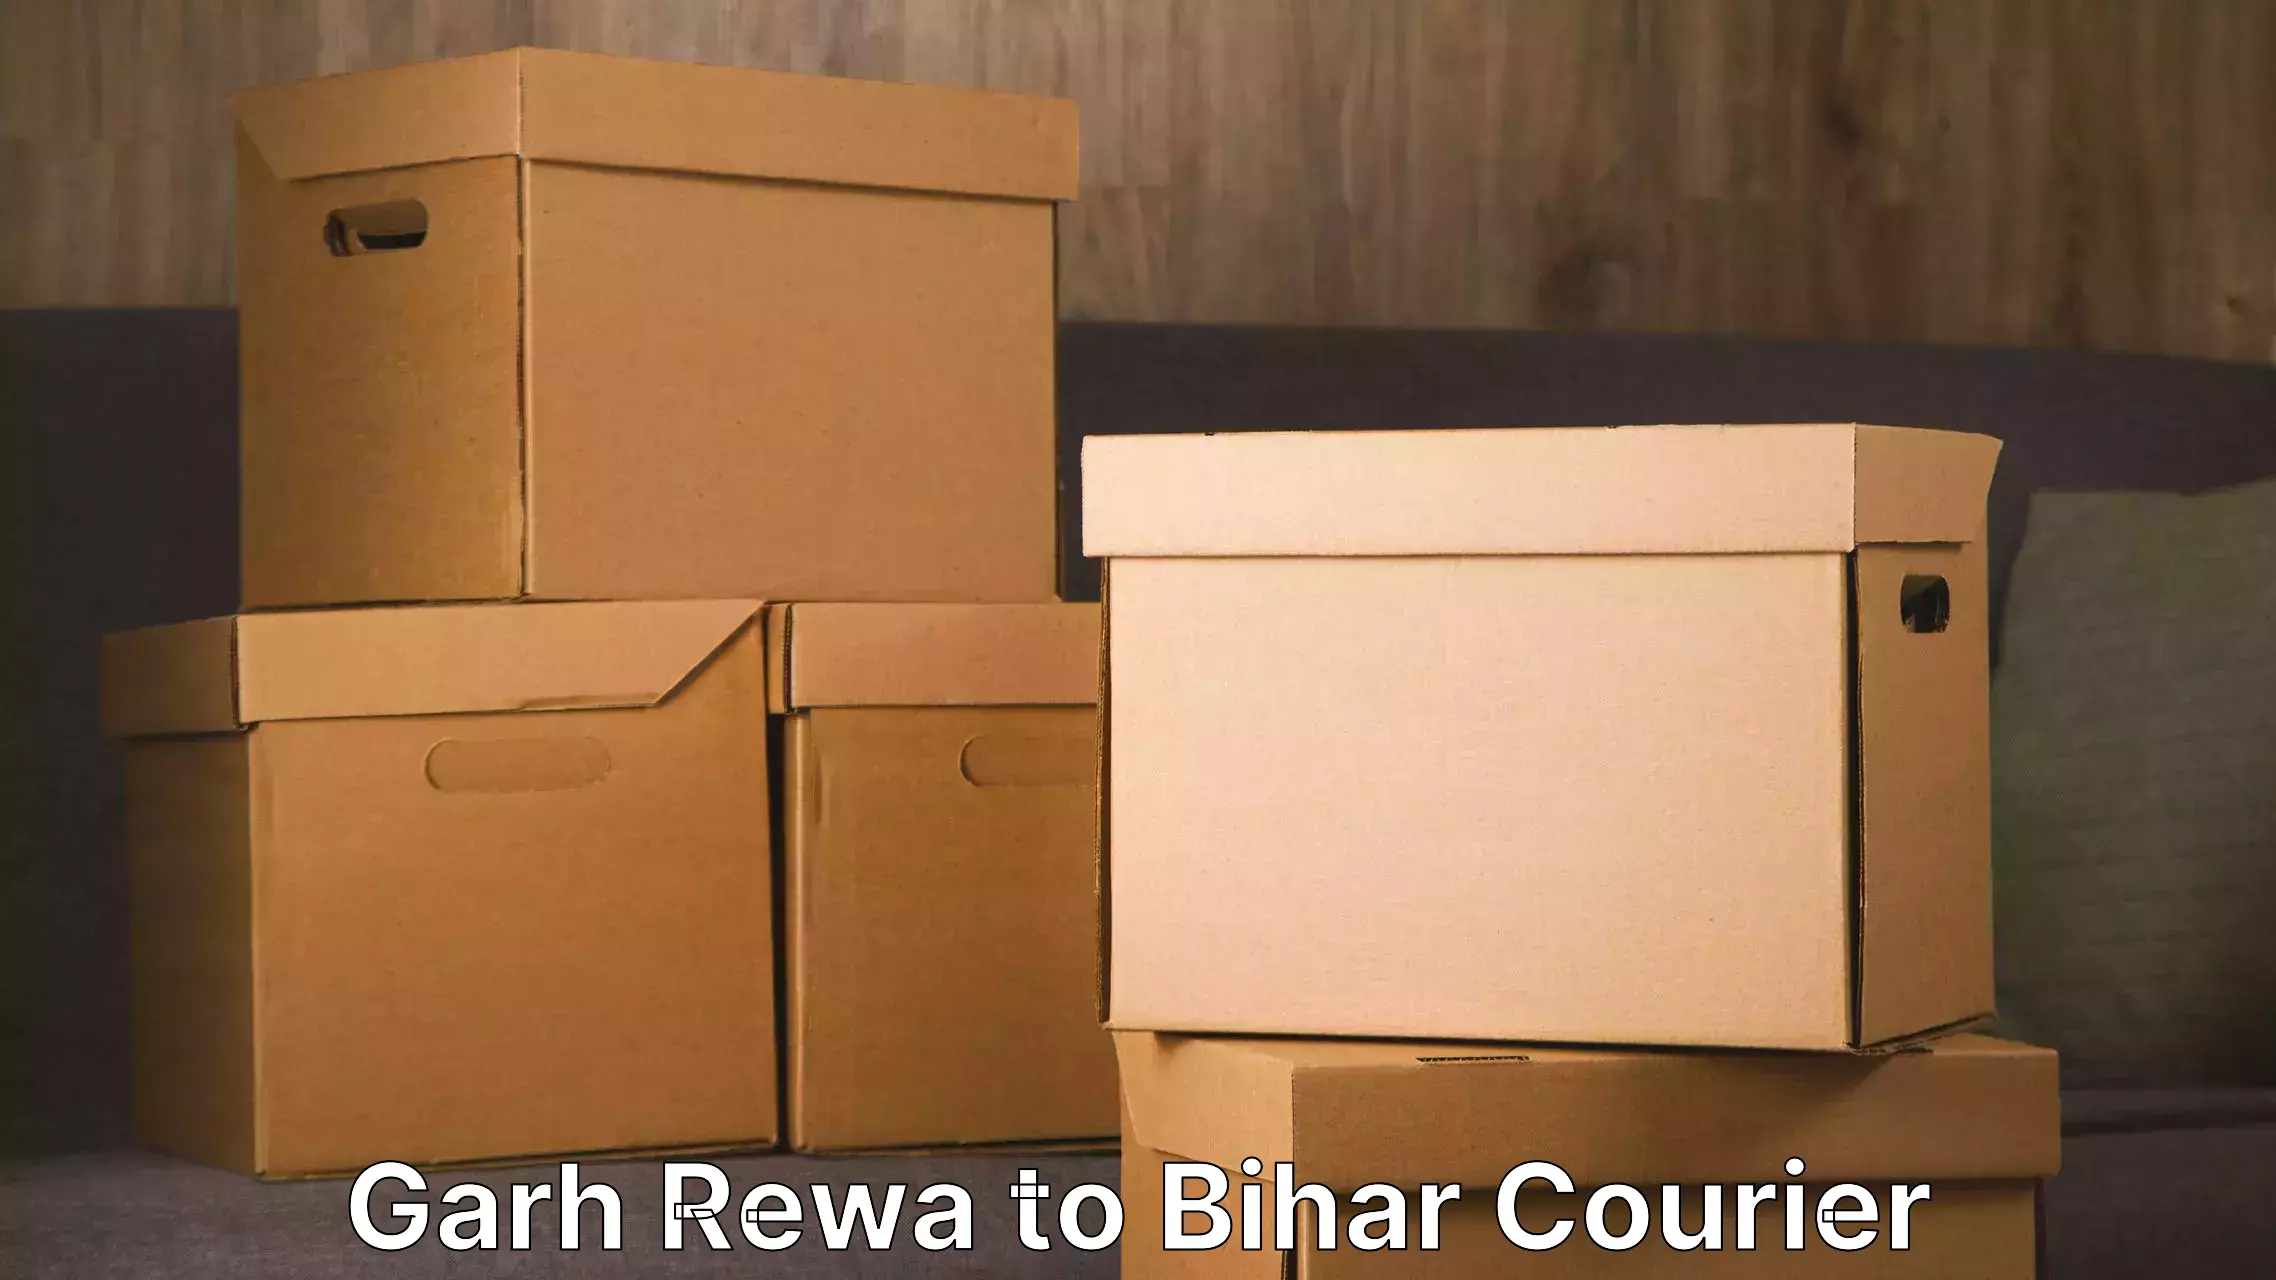 Dependable moving services in Garh Rewa to Bihar